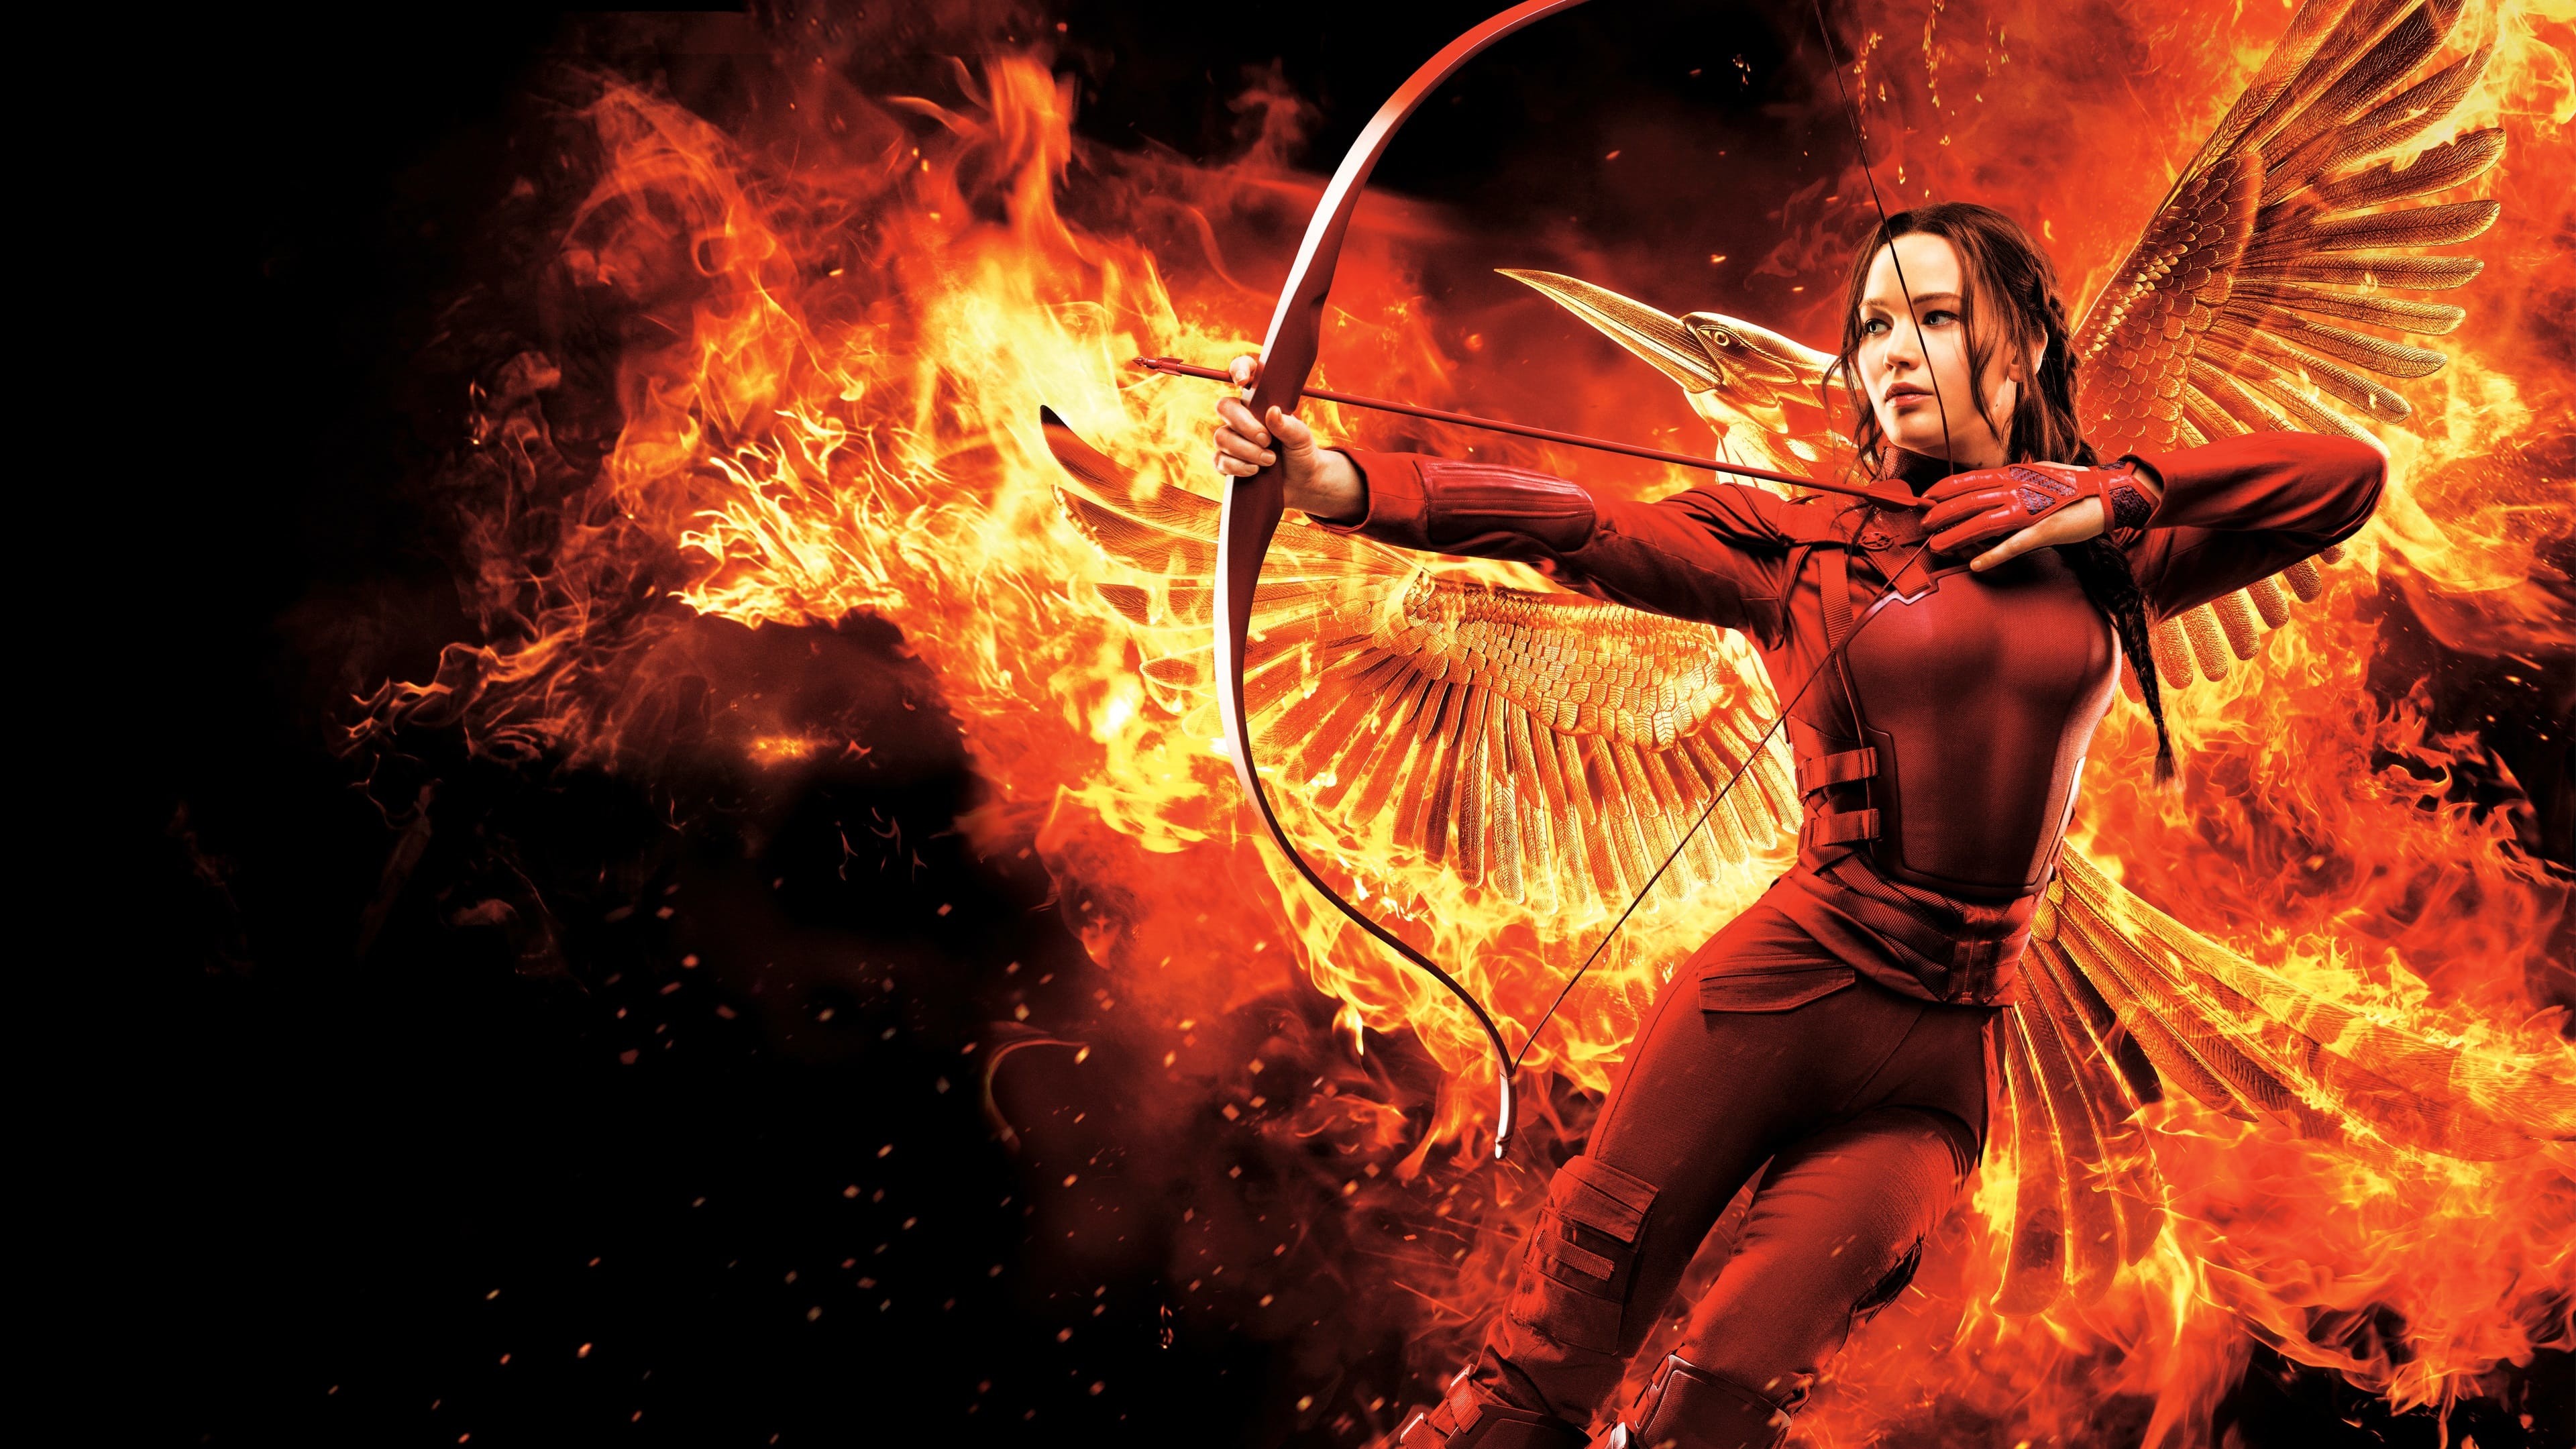 3840x2160 ... The Hunger Games: Mockingjay - Part 2 Wallpapers hd